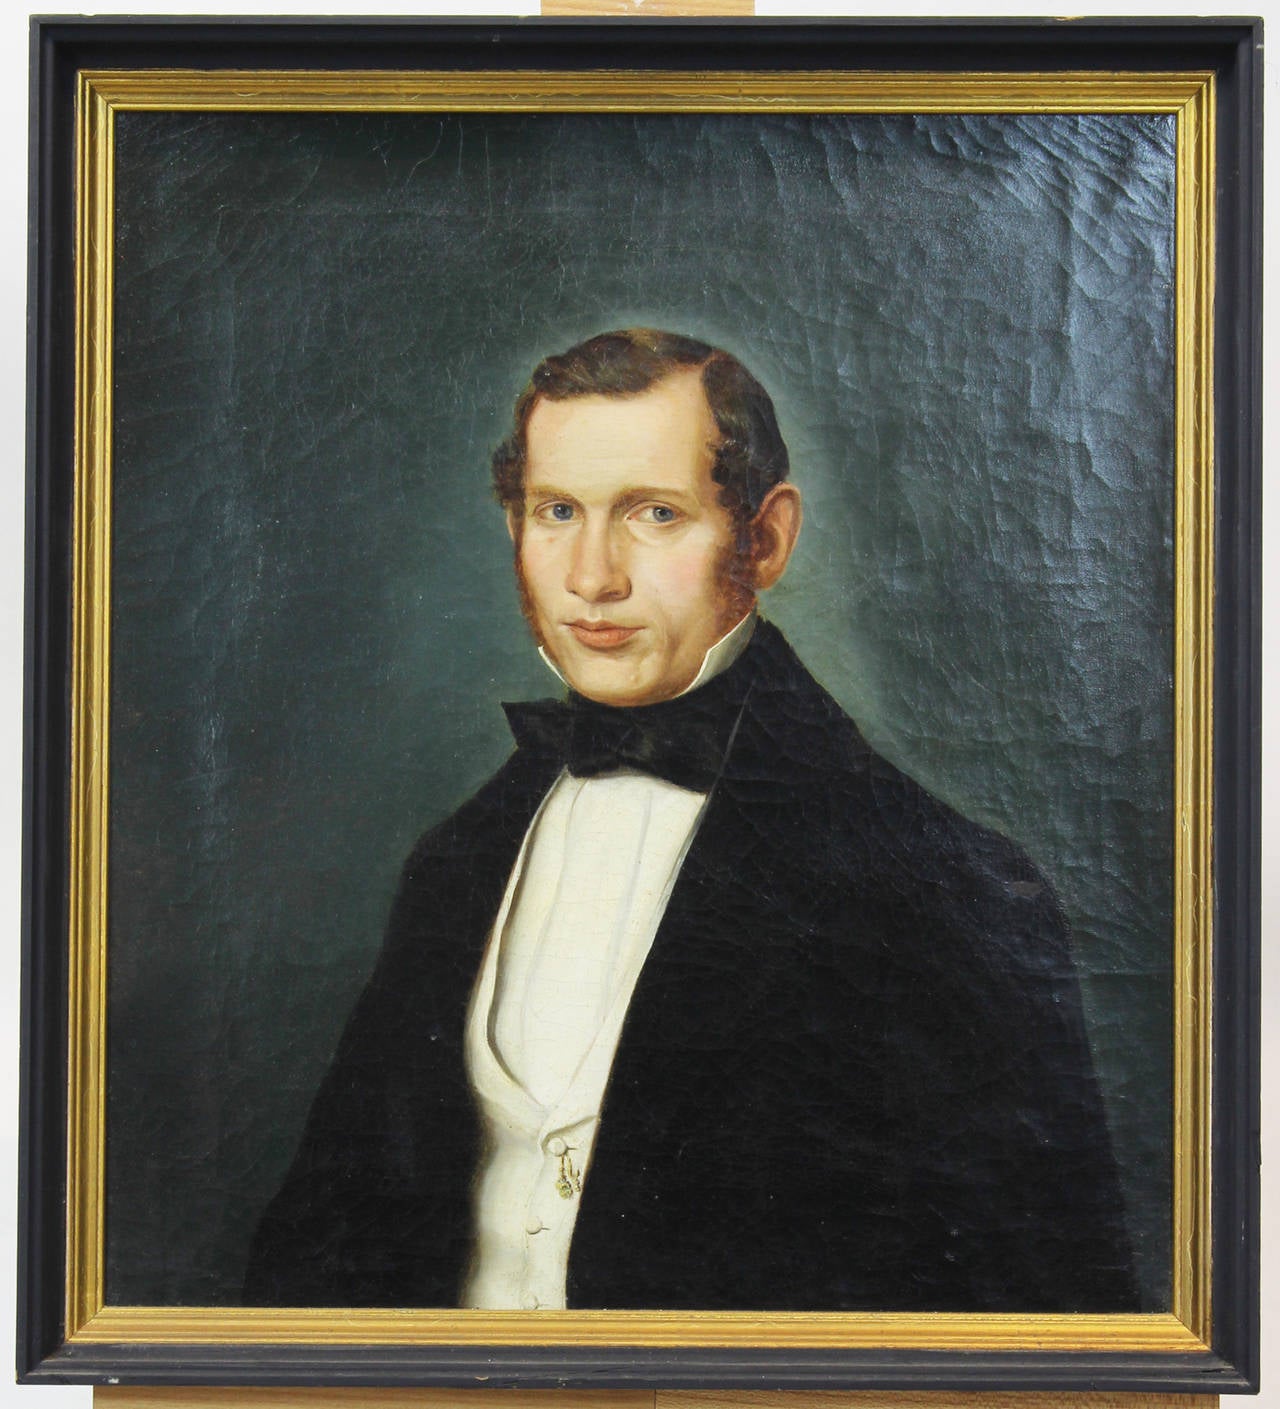 An exceptionally well painted oil on canvas mid-19th century portrait of a prosperous young gentleman.